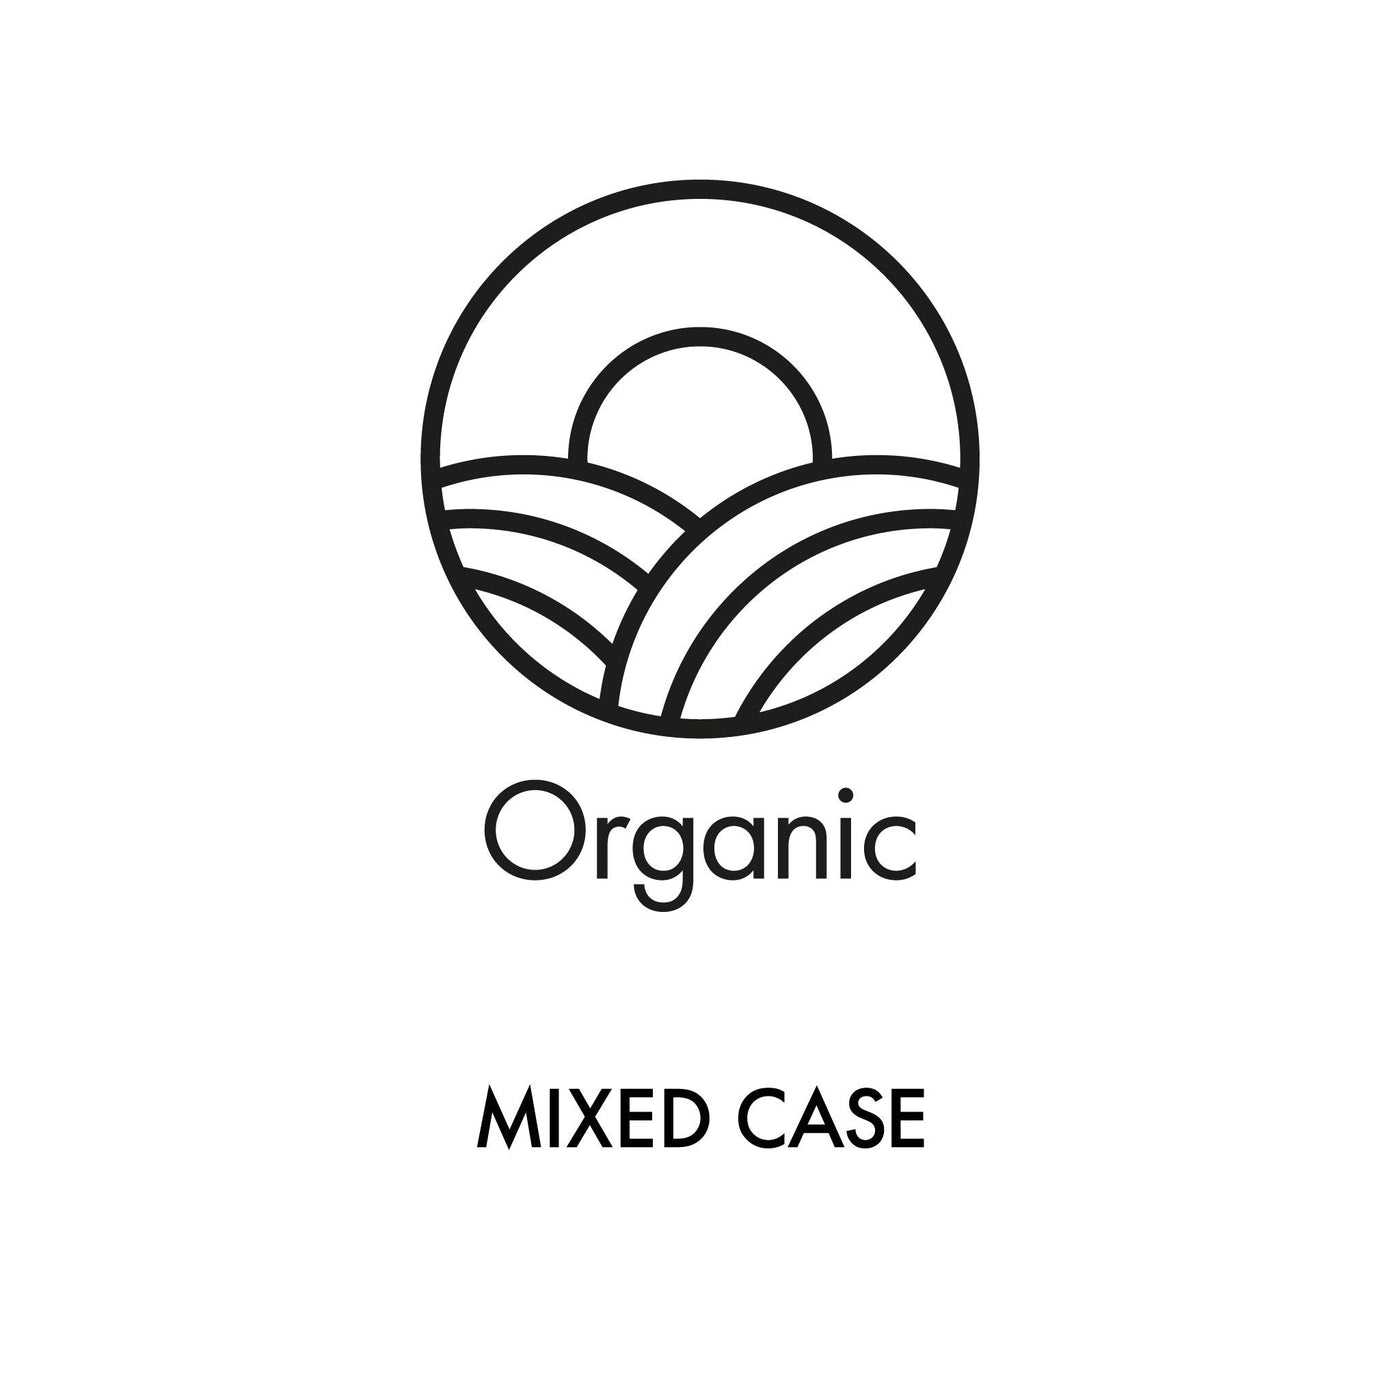 The Organic Mixed Case